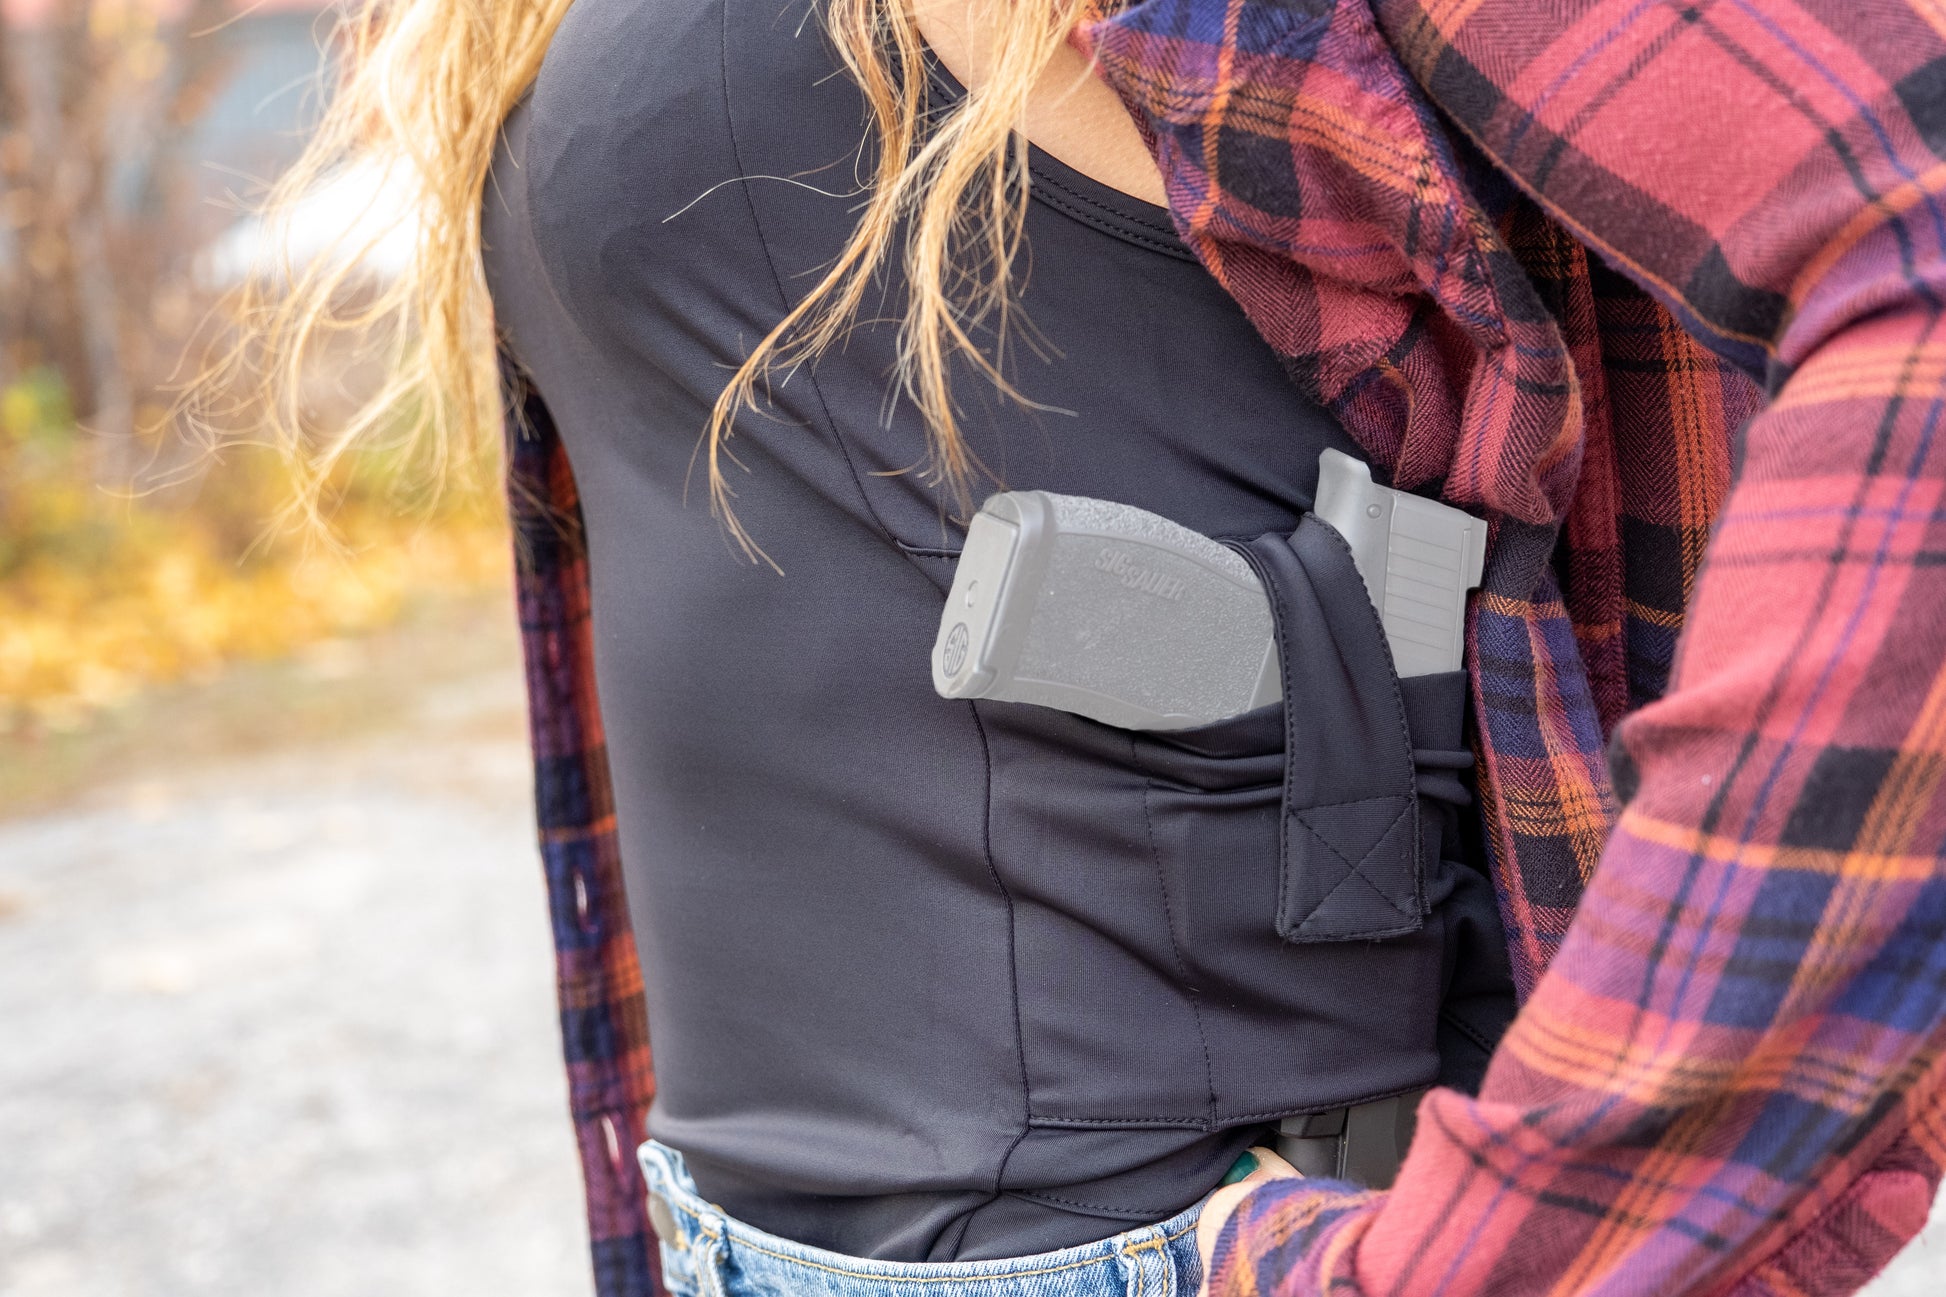 NEW ConcealmentClothes Women's Concealed Carry Gun Holster 3/4